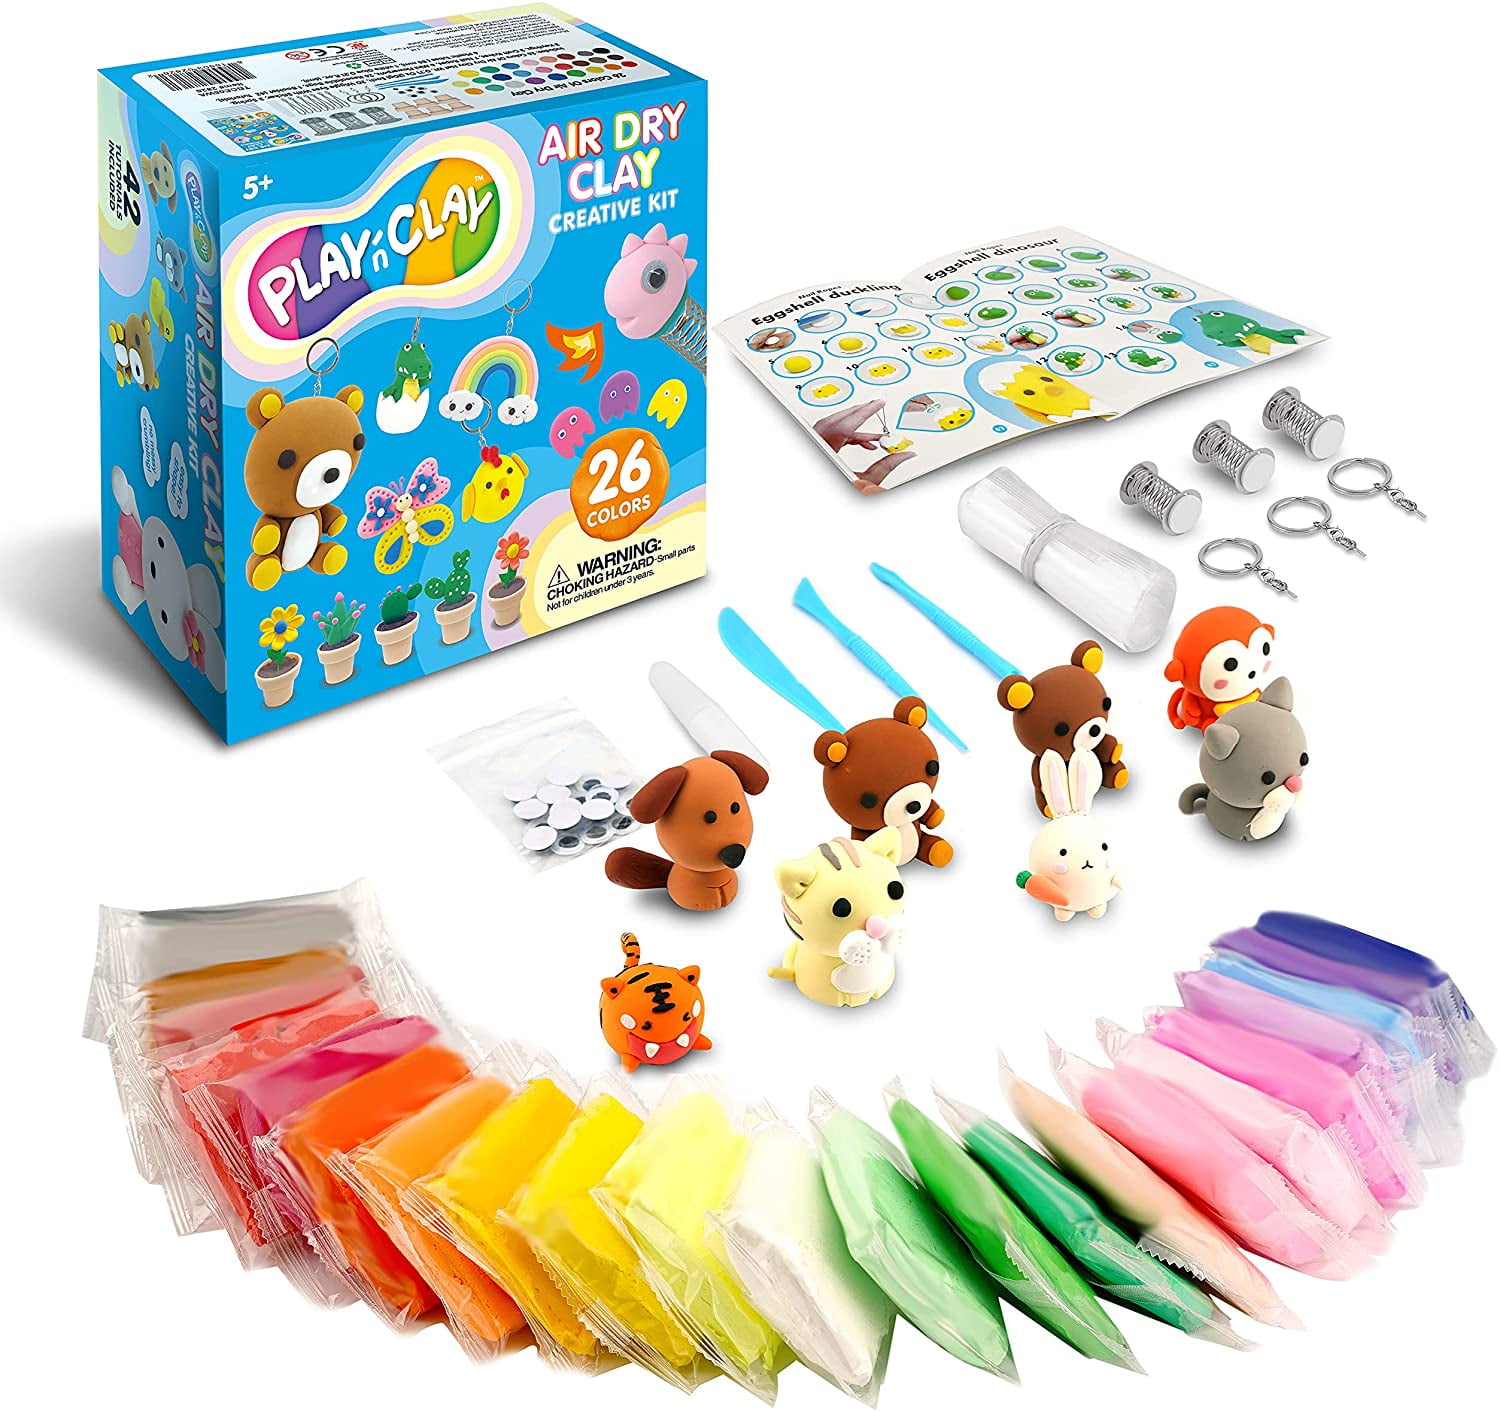 Artsity Air Dry Clay, 24 Colour Modelling Set with 3 Sculpting Tools, Magic Foam Clay for Kids and Adults